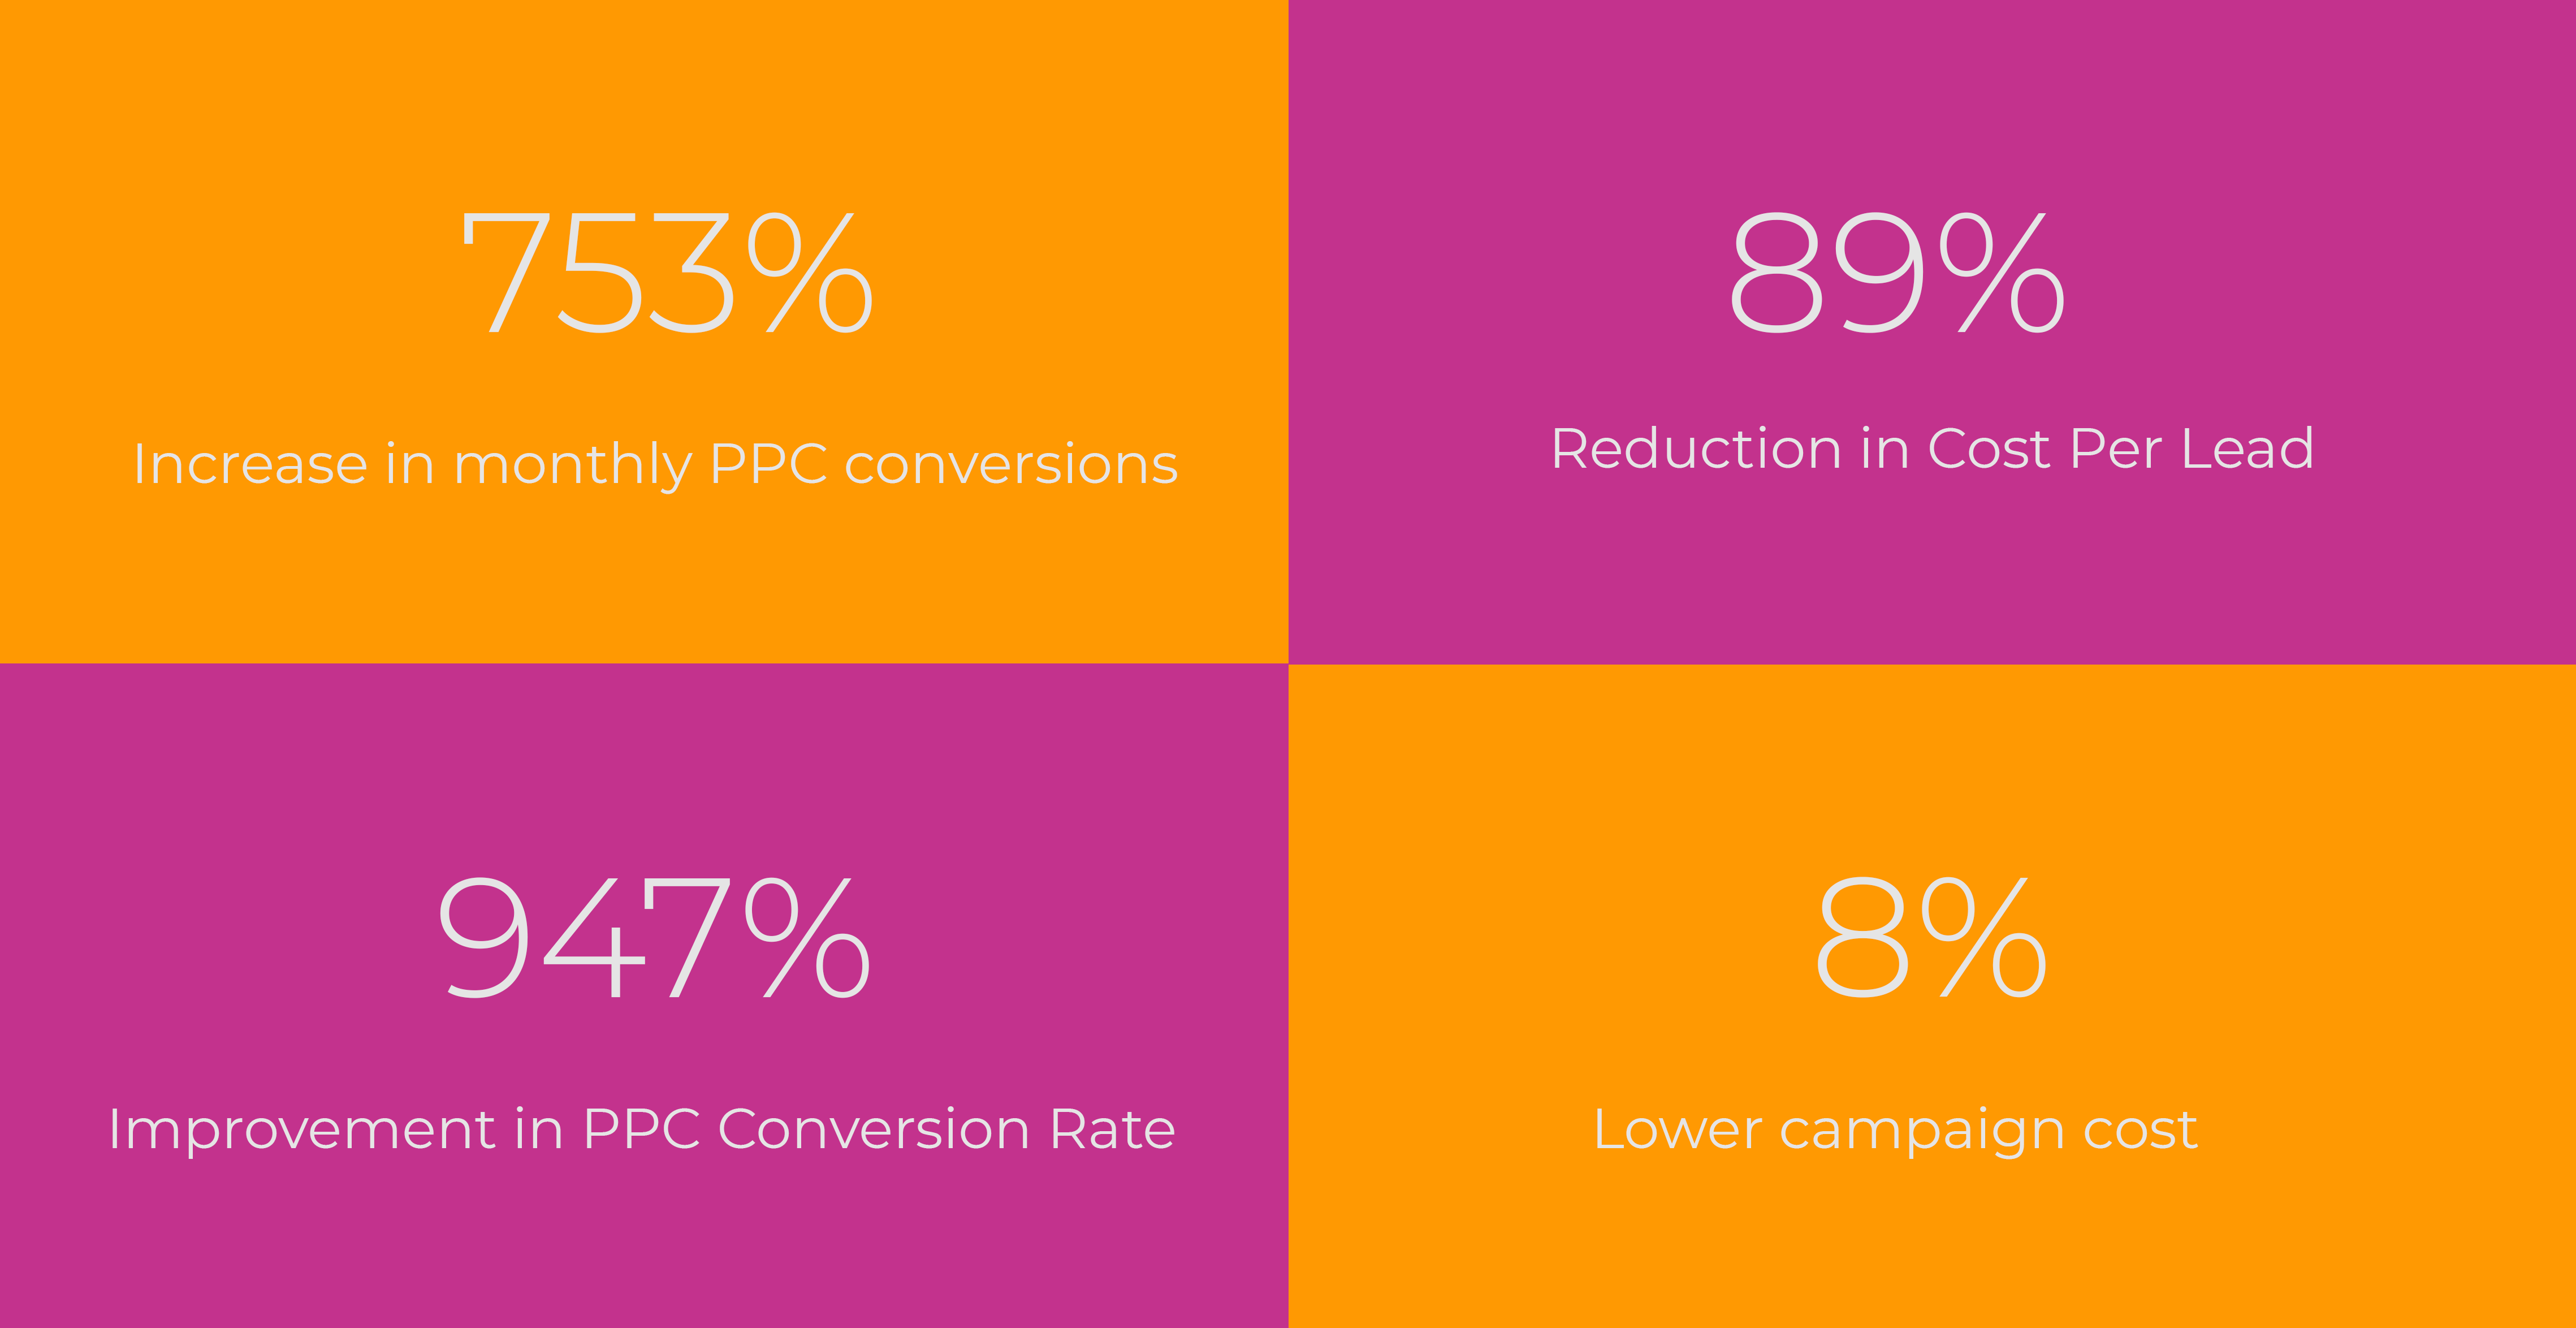 753% increase in monthly ppc conversions, 89% reductions in CPL, 947% improvement in PPC conversion rate